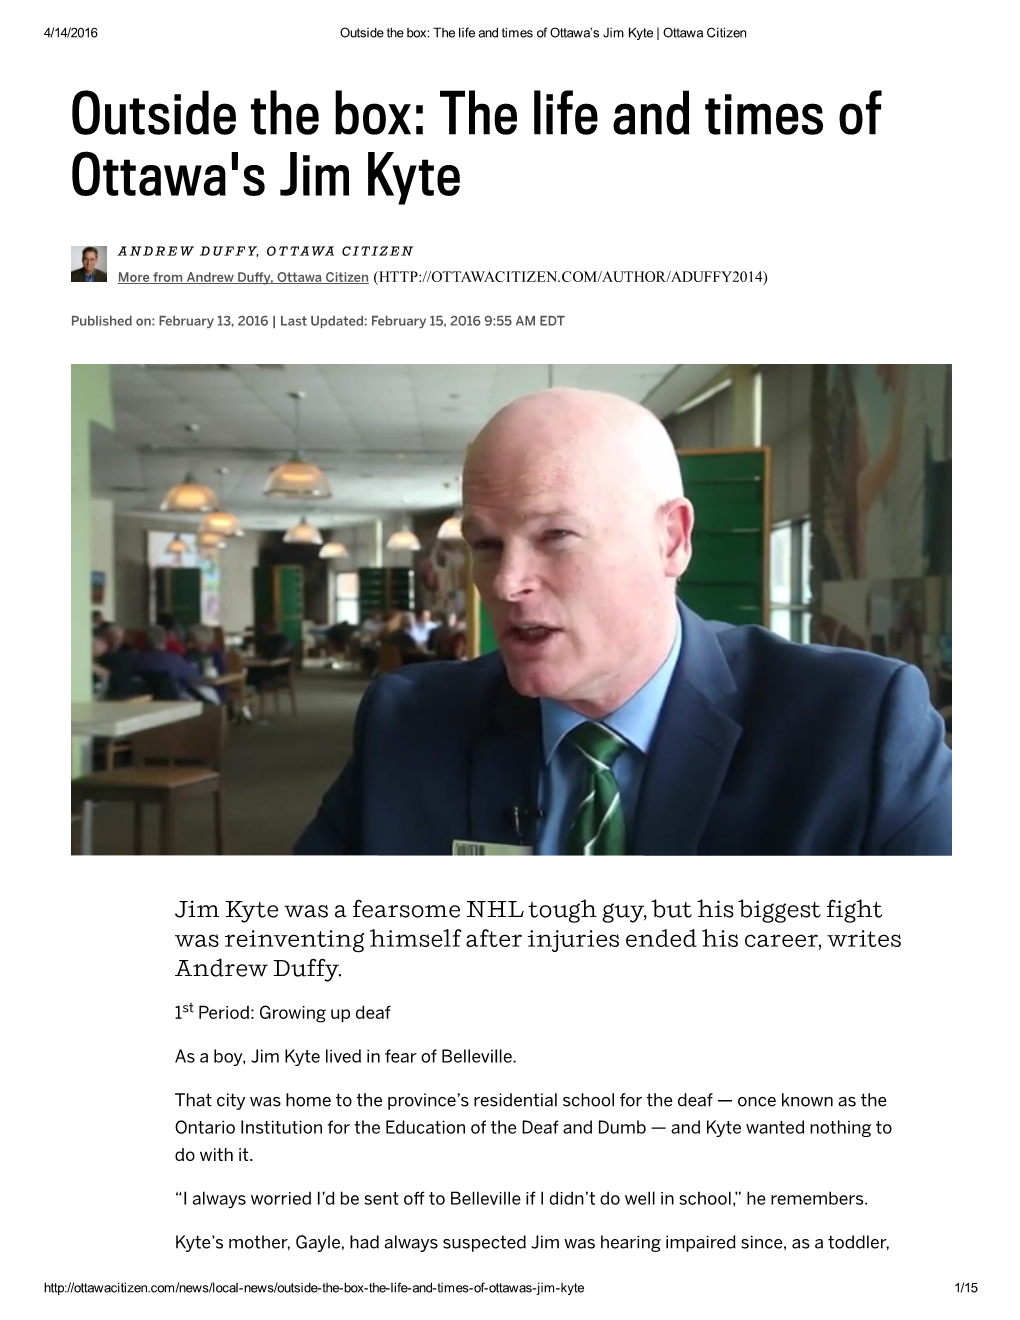 Outside the Box: the Life and Times of Ottawa's Jim Kyte